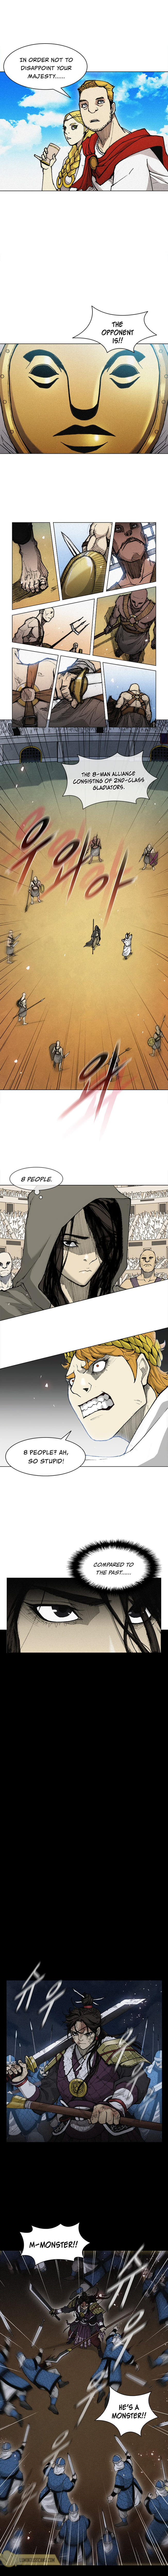 Long Way of the Warrior - Chapter 19 Page 9